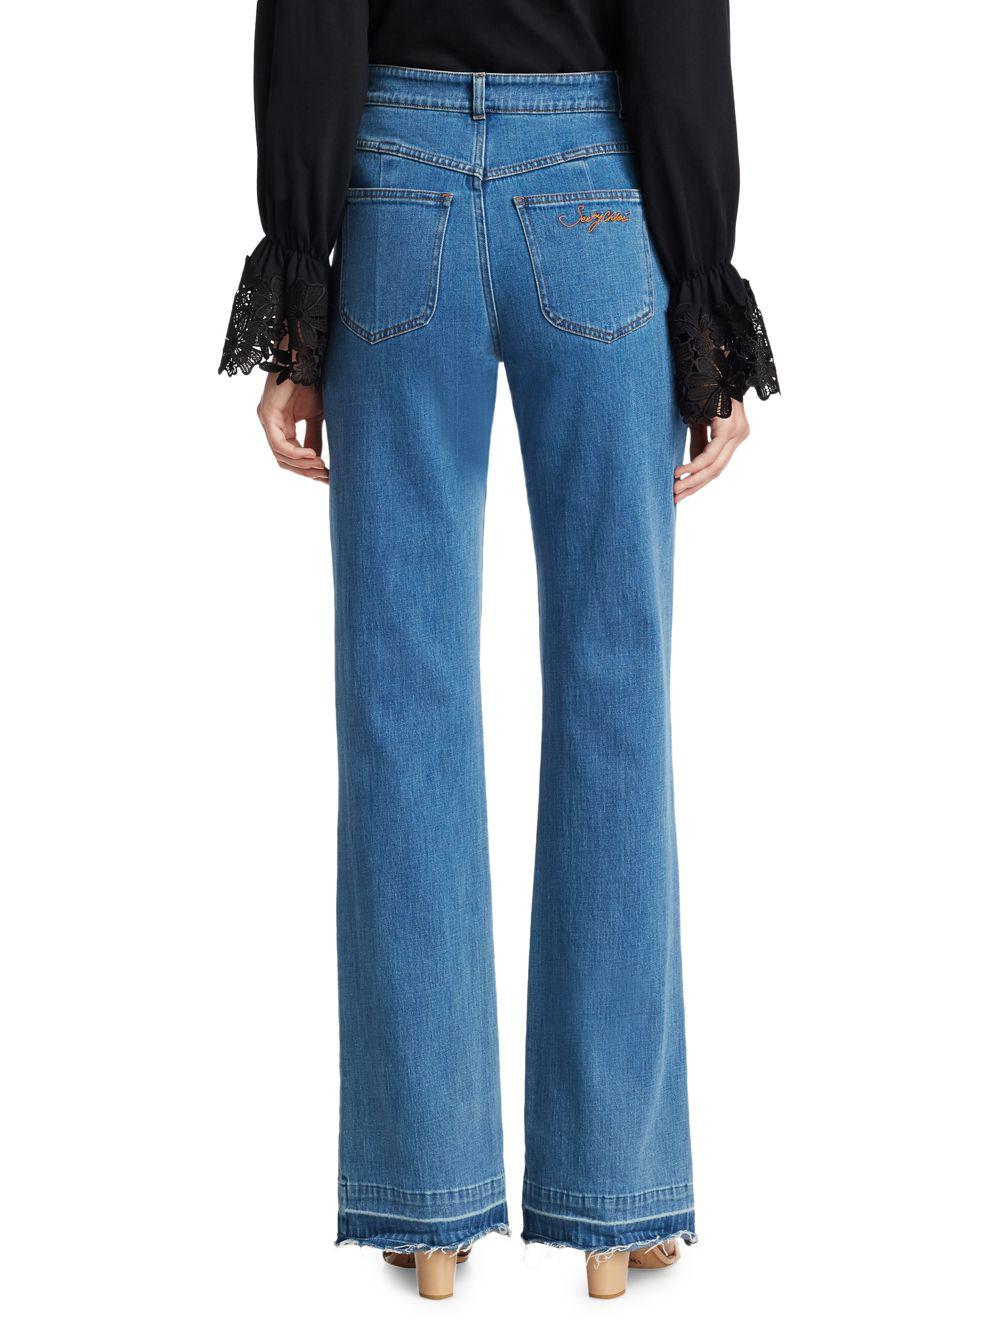 See By Chloé Denim High-waist Flare Jeans in Blue - Lyst